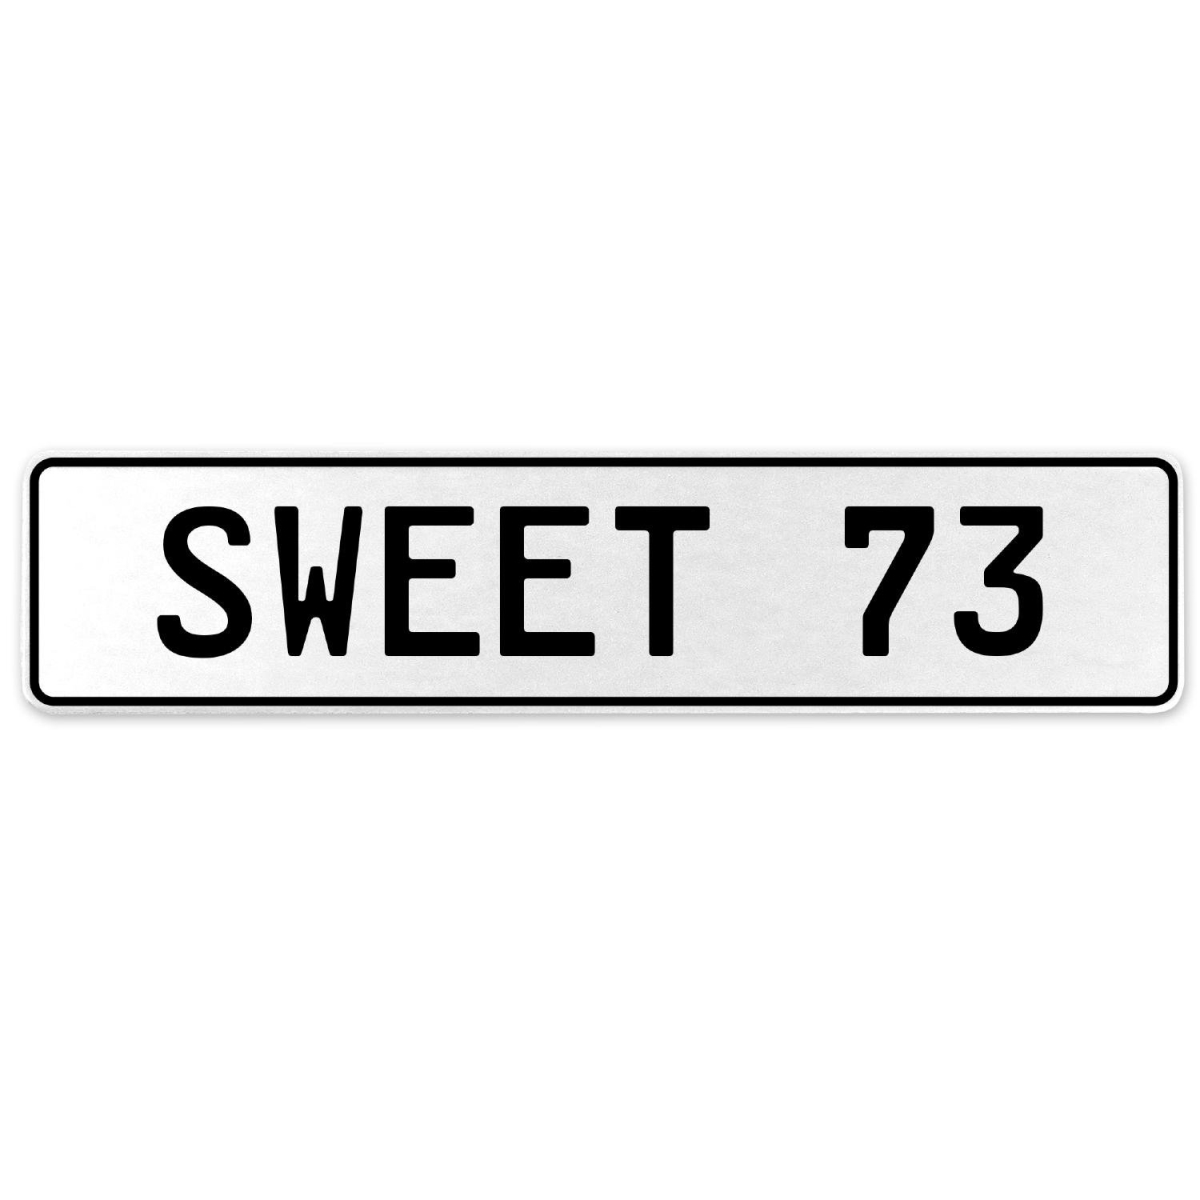 554175 Sweet 73 - White Aluminum Street Sign Mancave Euro Plate Name Door Sign Wall